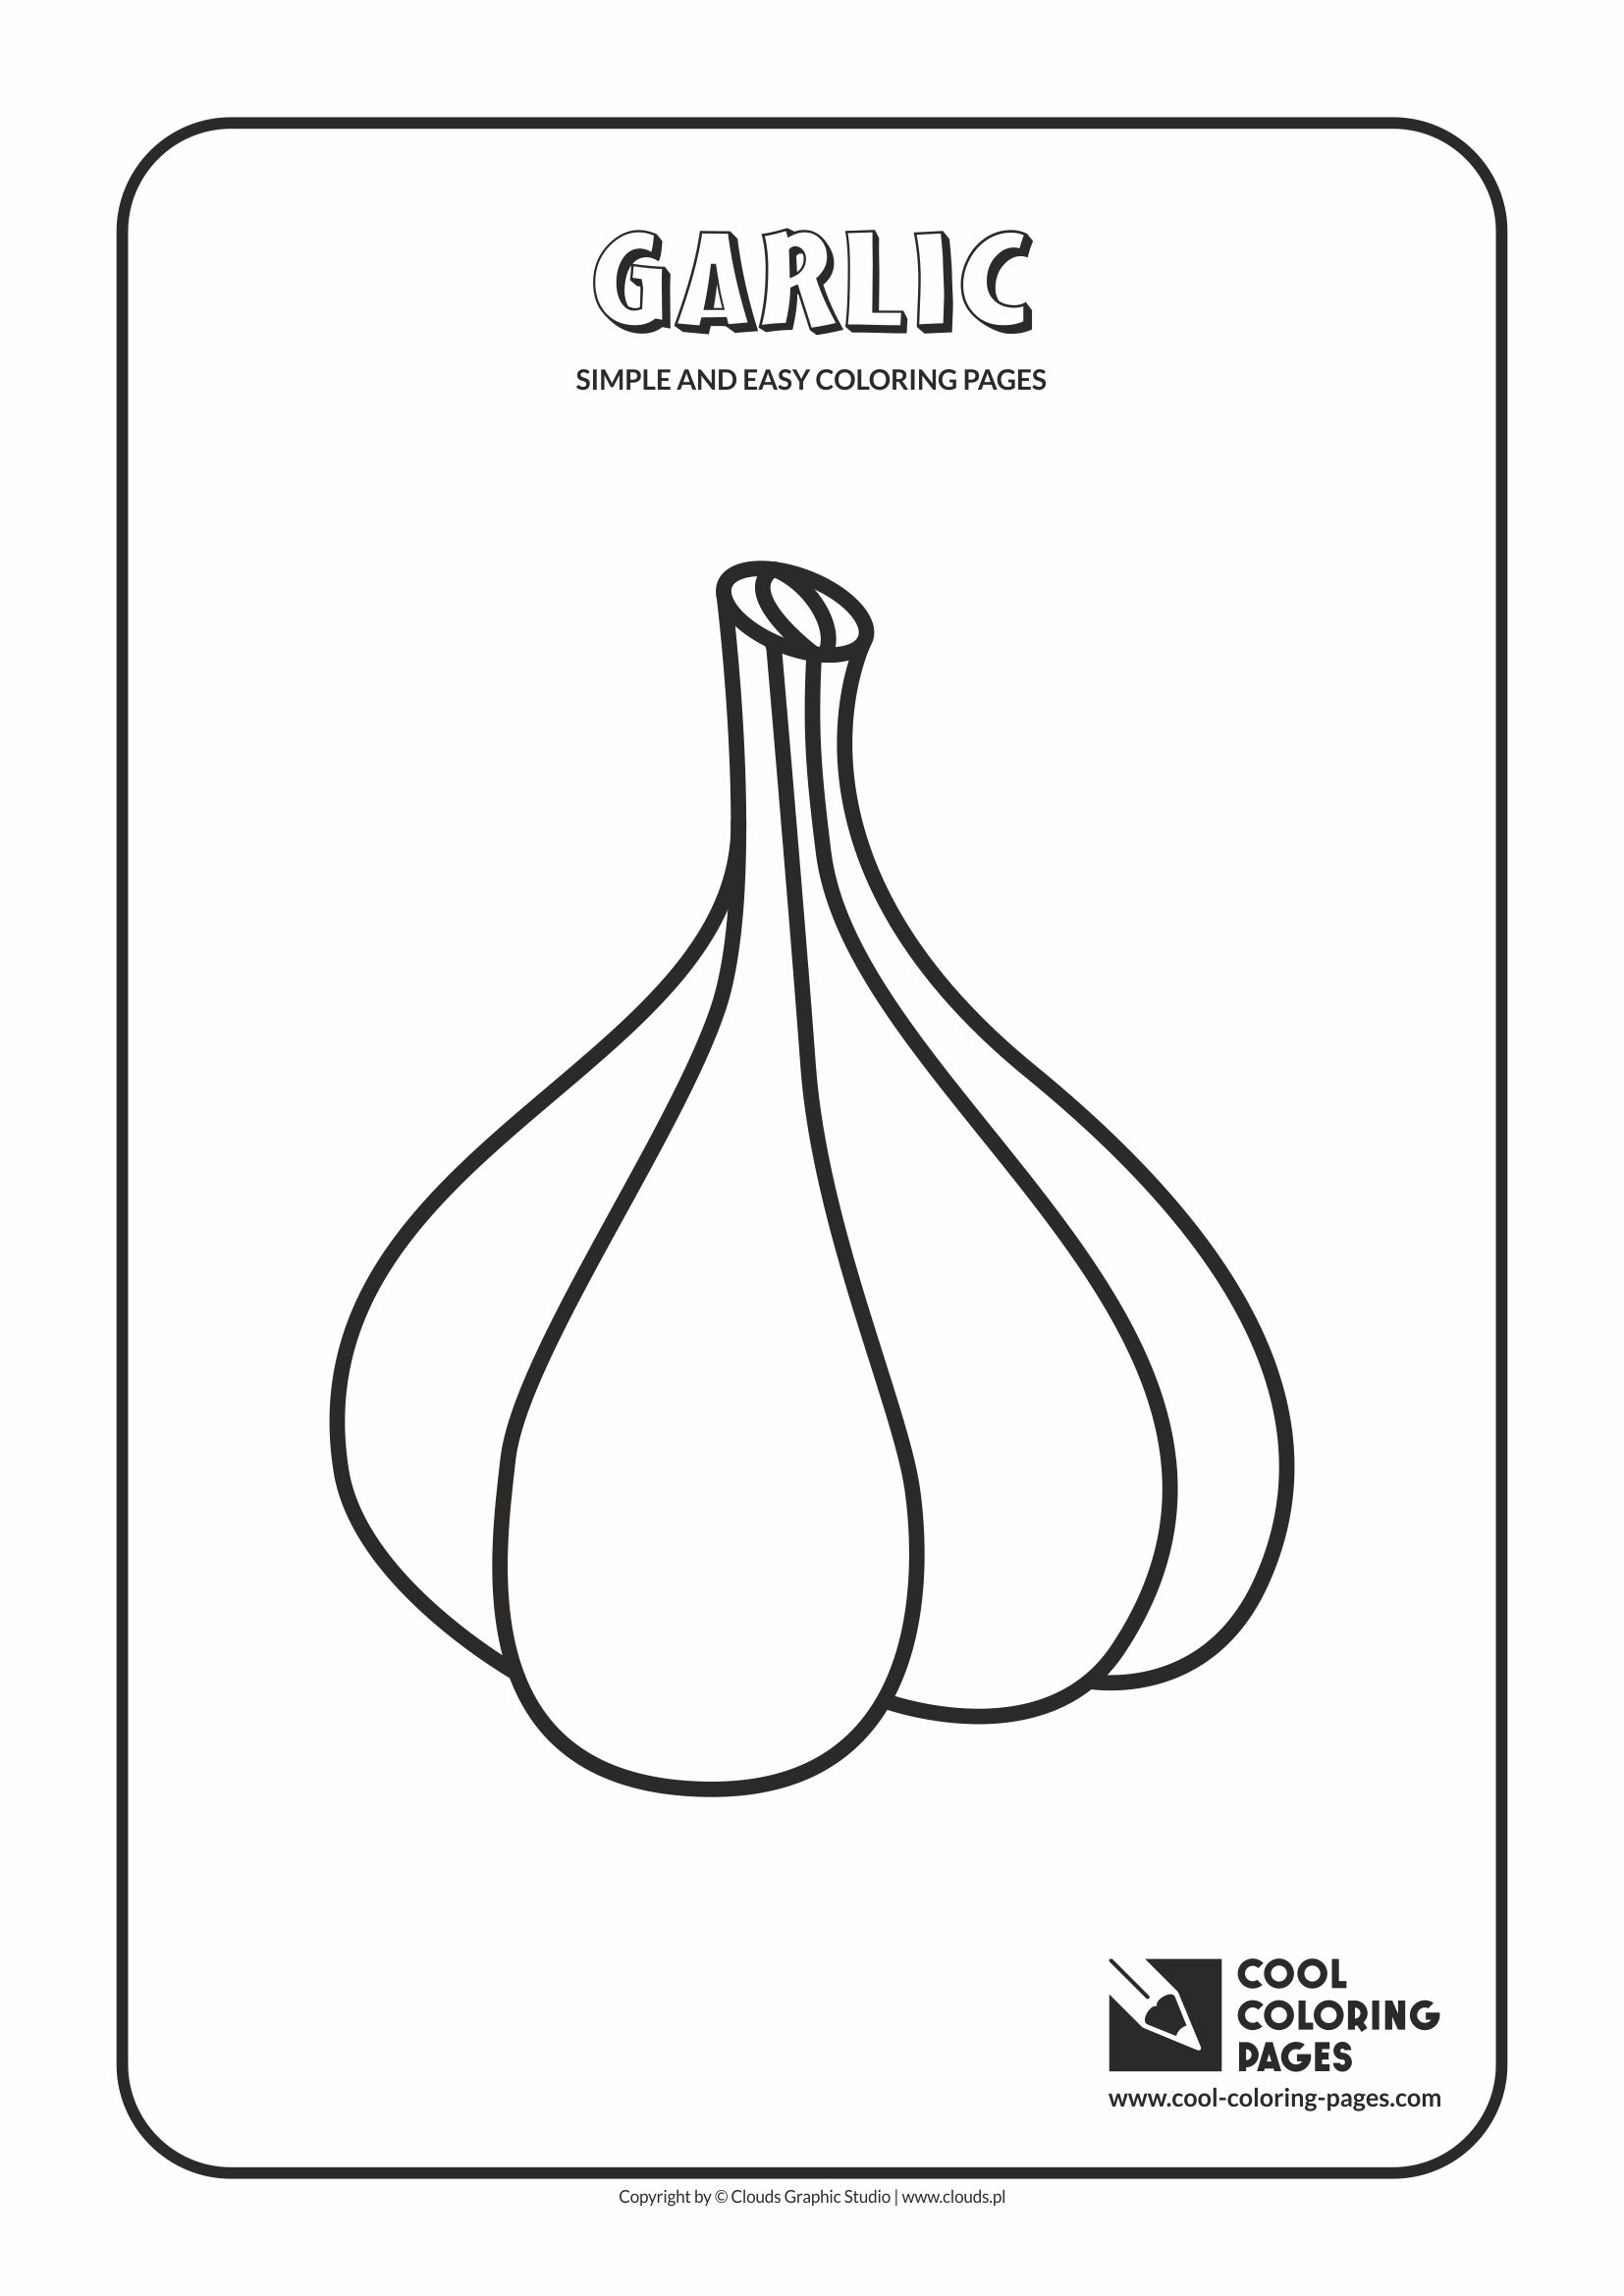 Simple and easy coloring pages for toddlers - Garlic